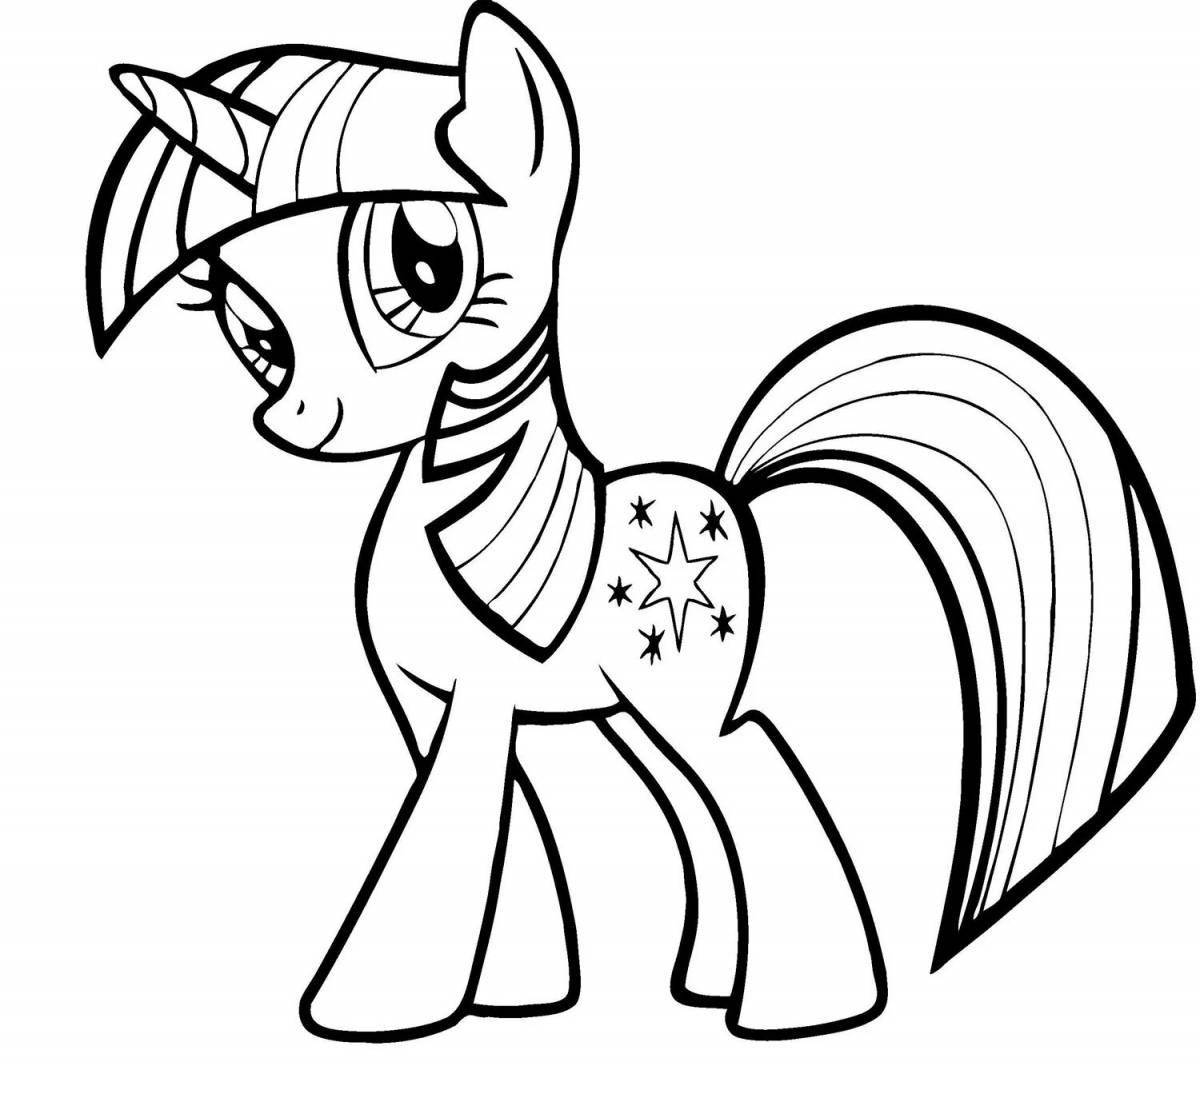 Funny ponyville pony coloring page